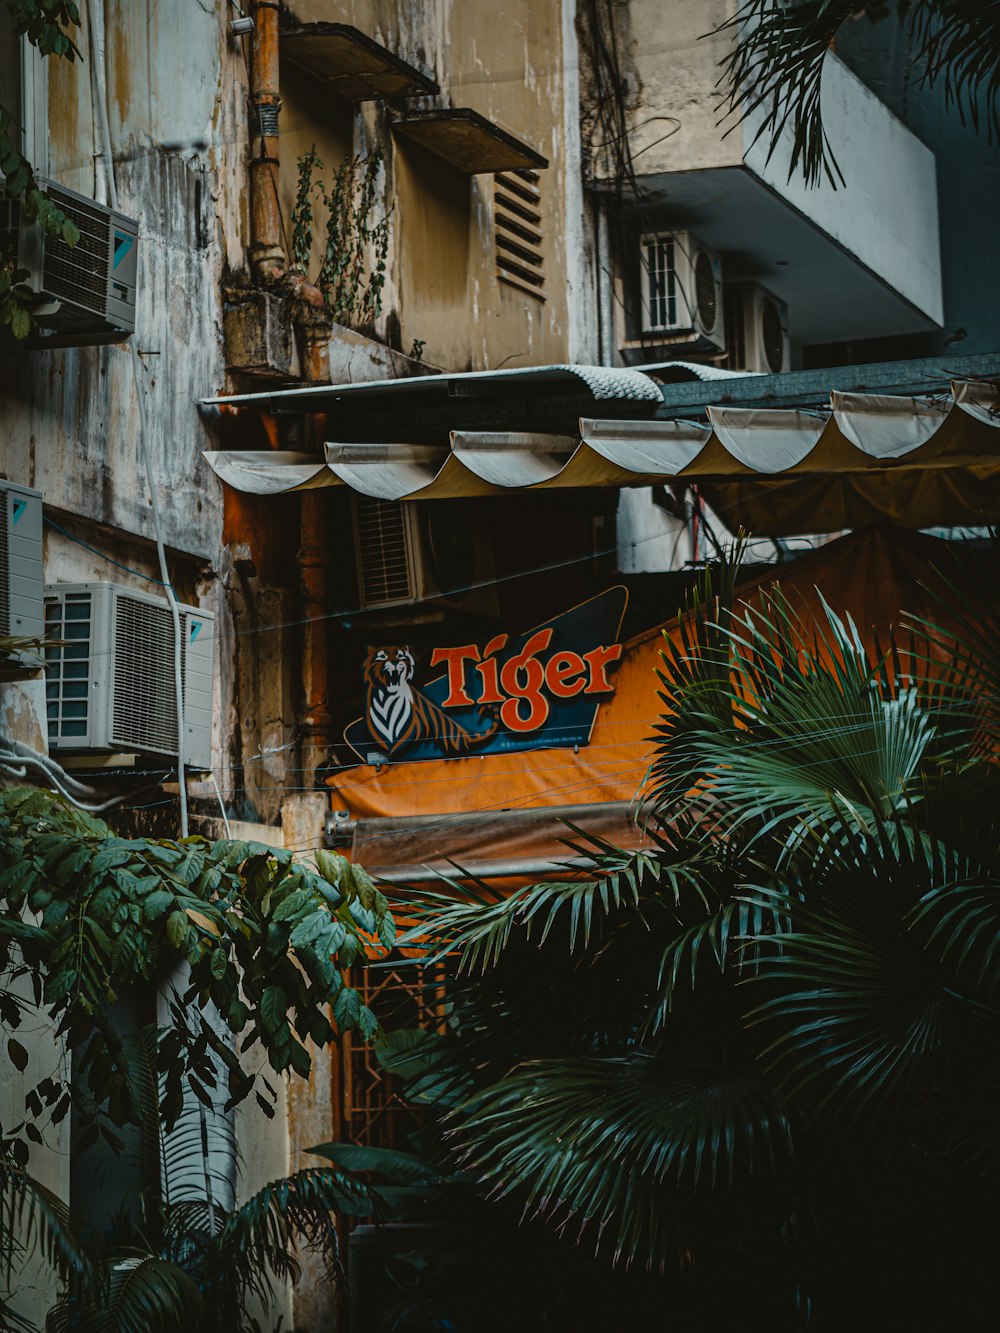 a building that has a tiger sign on it